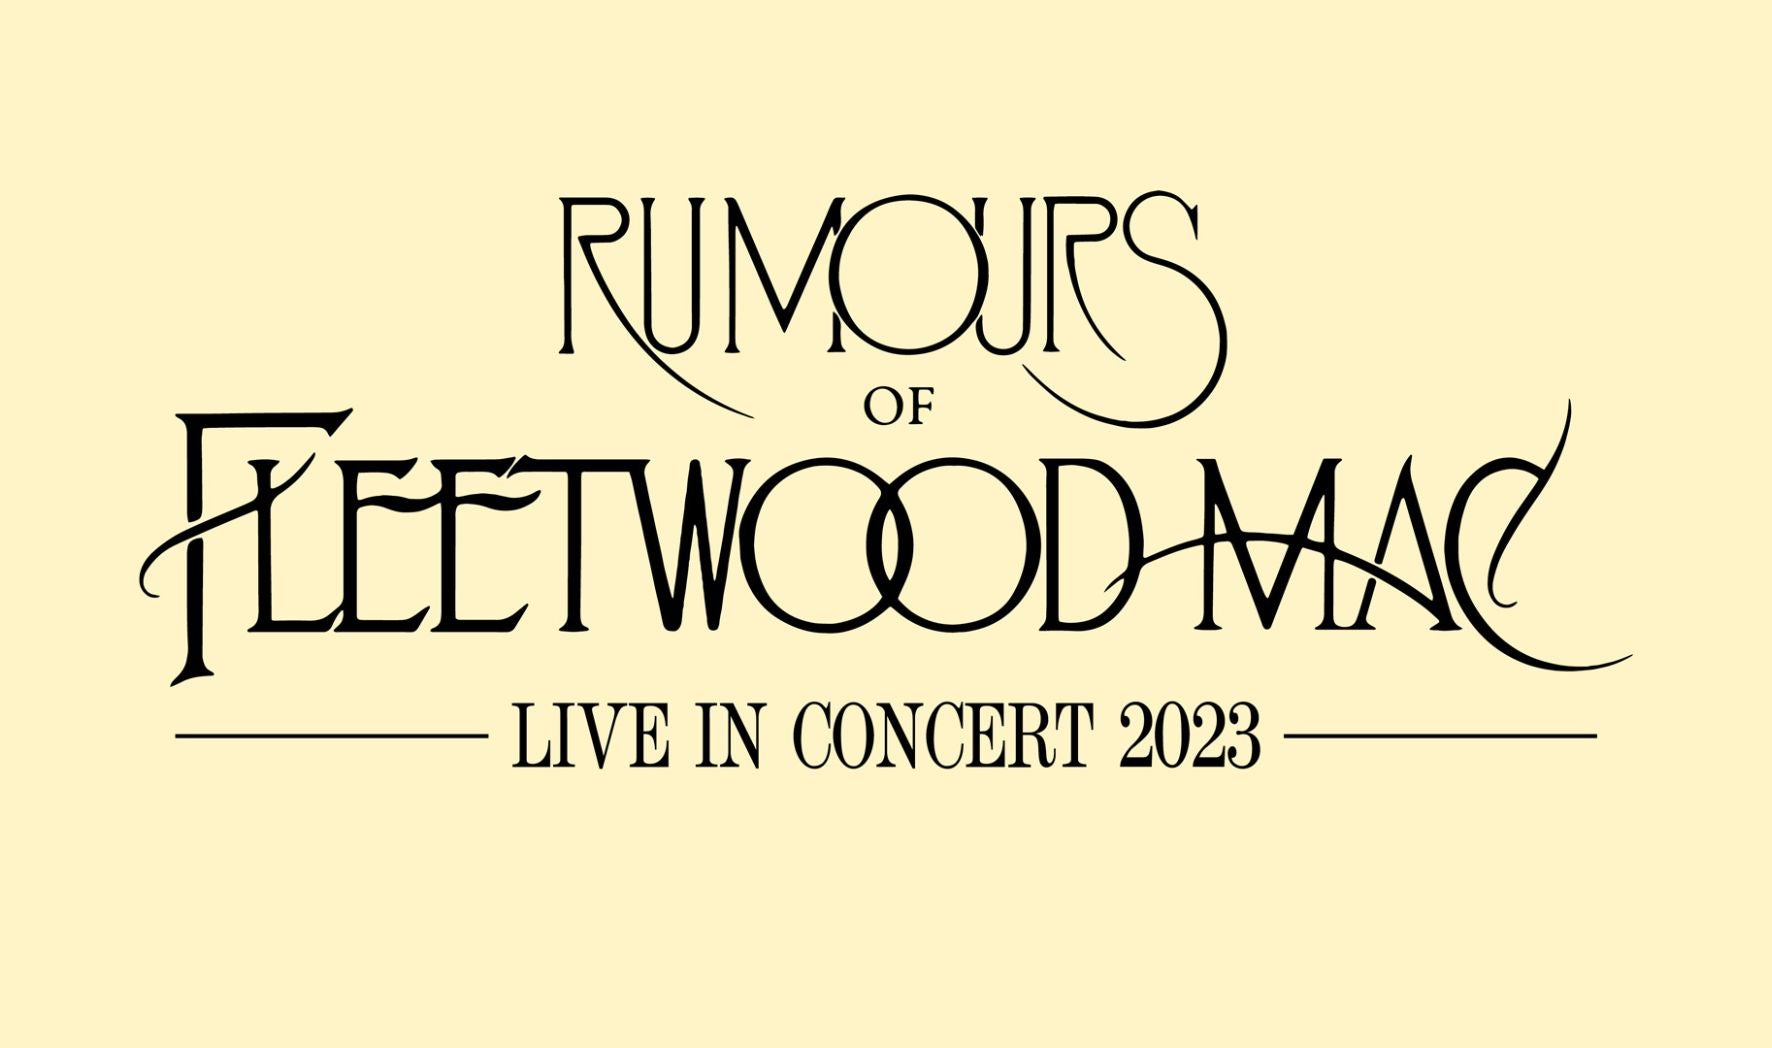 More Info for Rumours of Fleetwood Mac